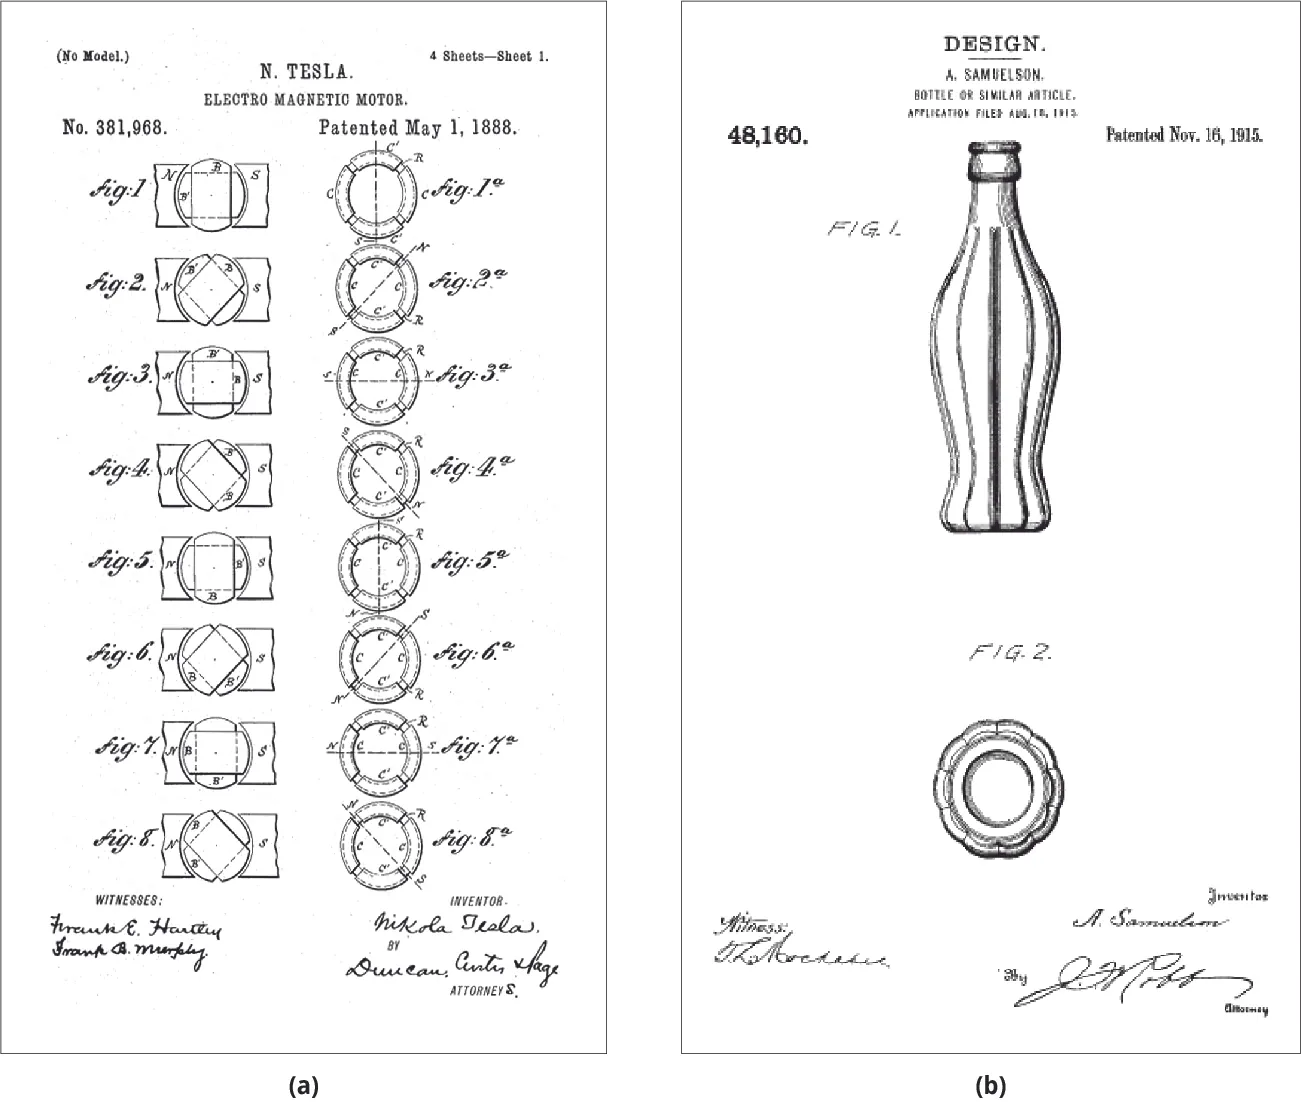 In (a), a drawing of different views of an alternating-current motor. In (b), drawings of the front view and top-down view of a soft drink bottle.